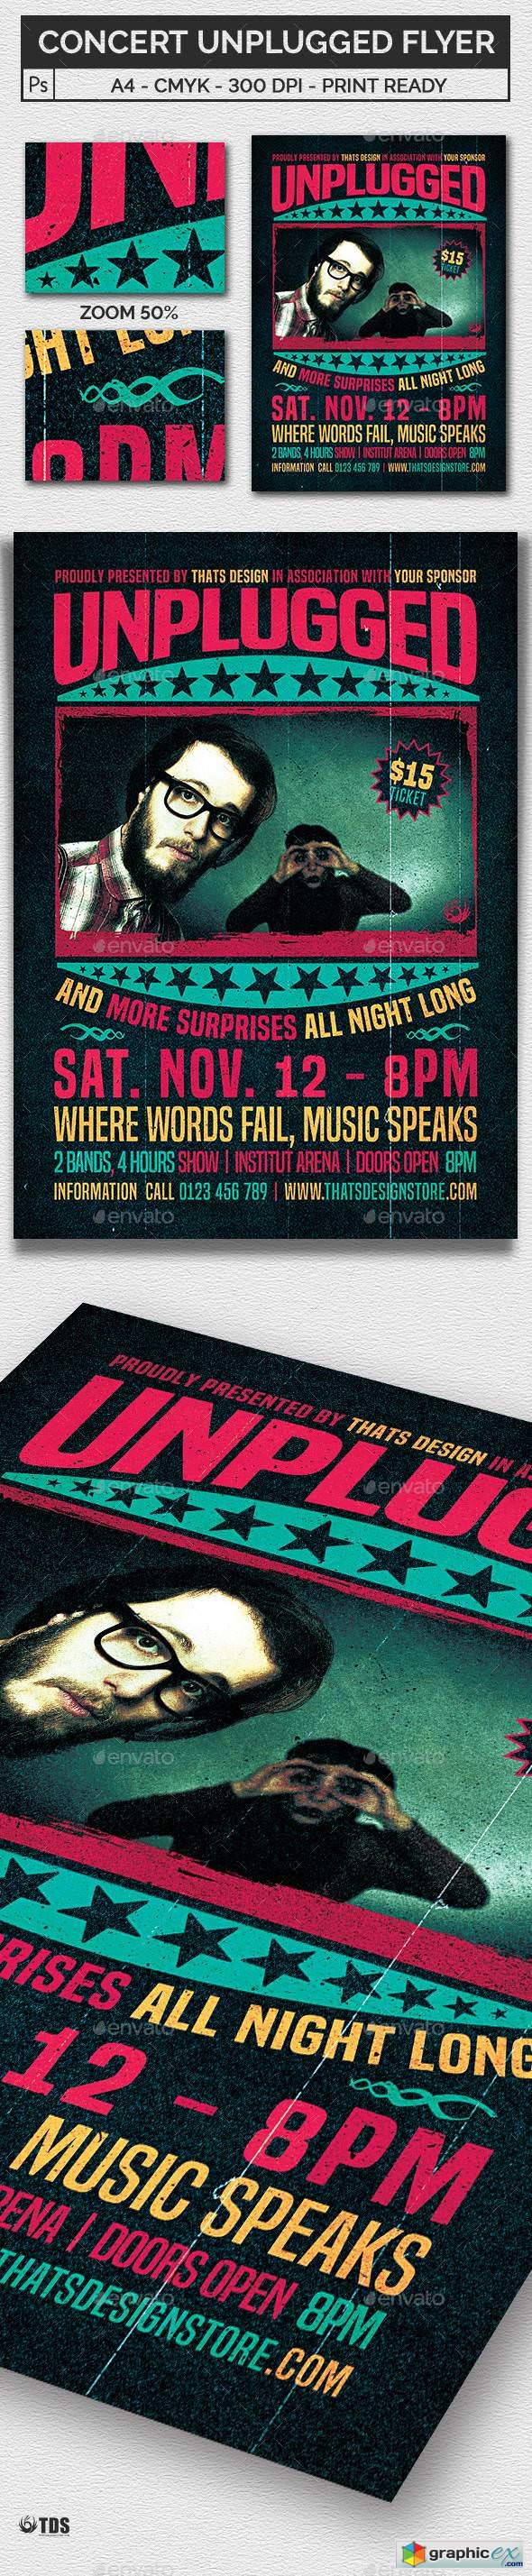 Concert Unplugged Flyer Template